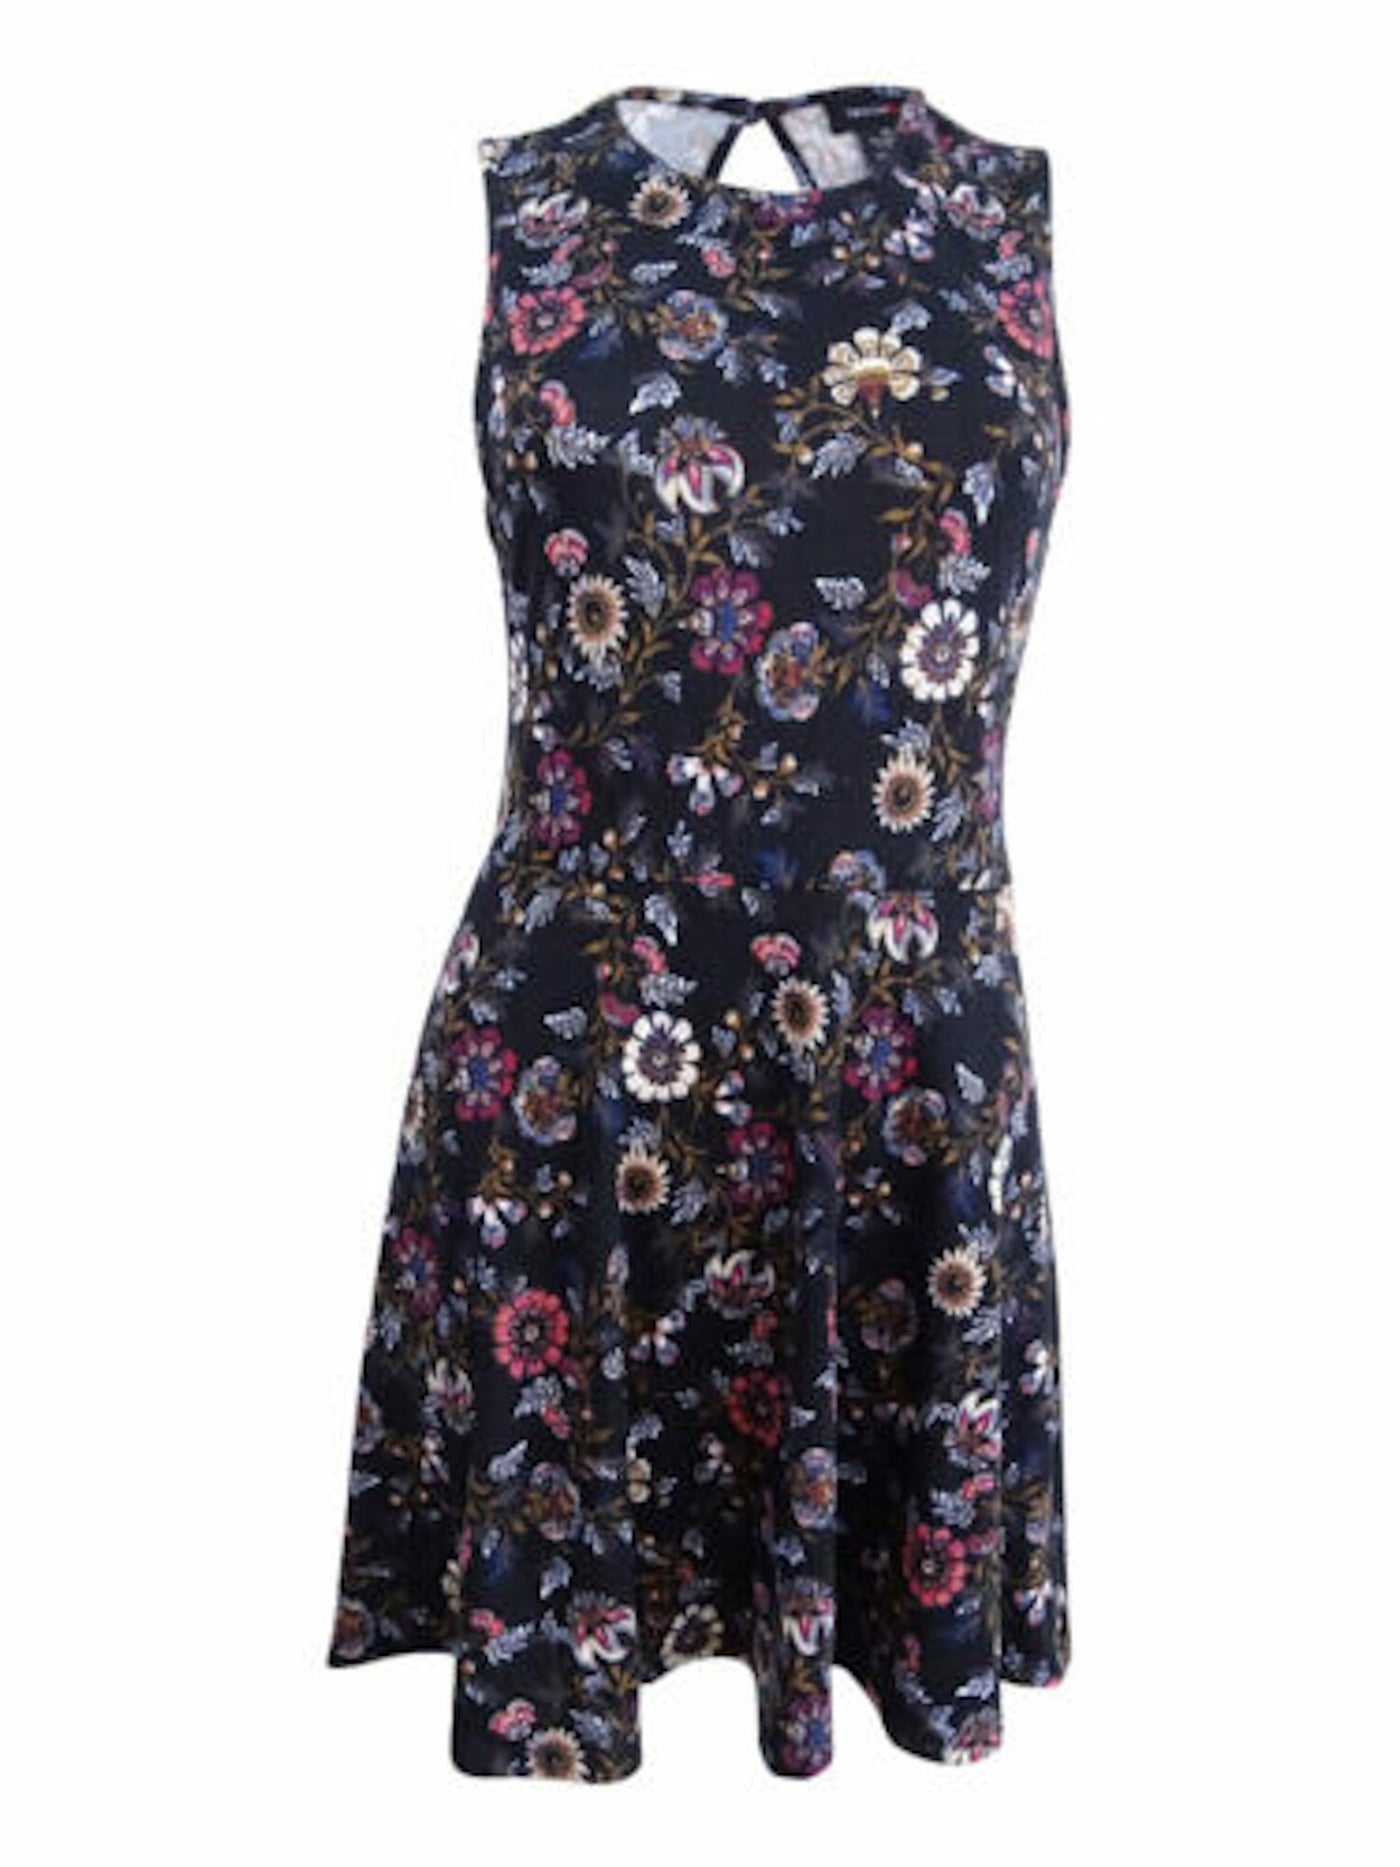 TEEZE ME Womens Black Floral Sleeveless Jewel Neck Above The Knee Cocktail Fit + Flare Dress Juniors L